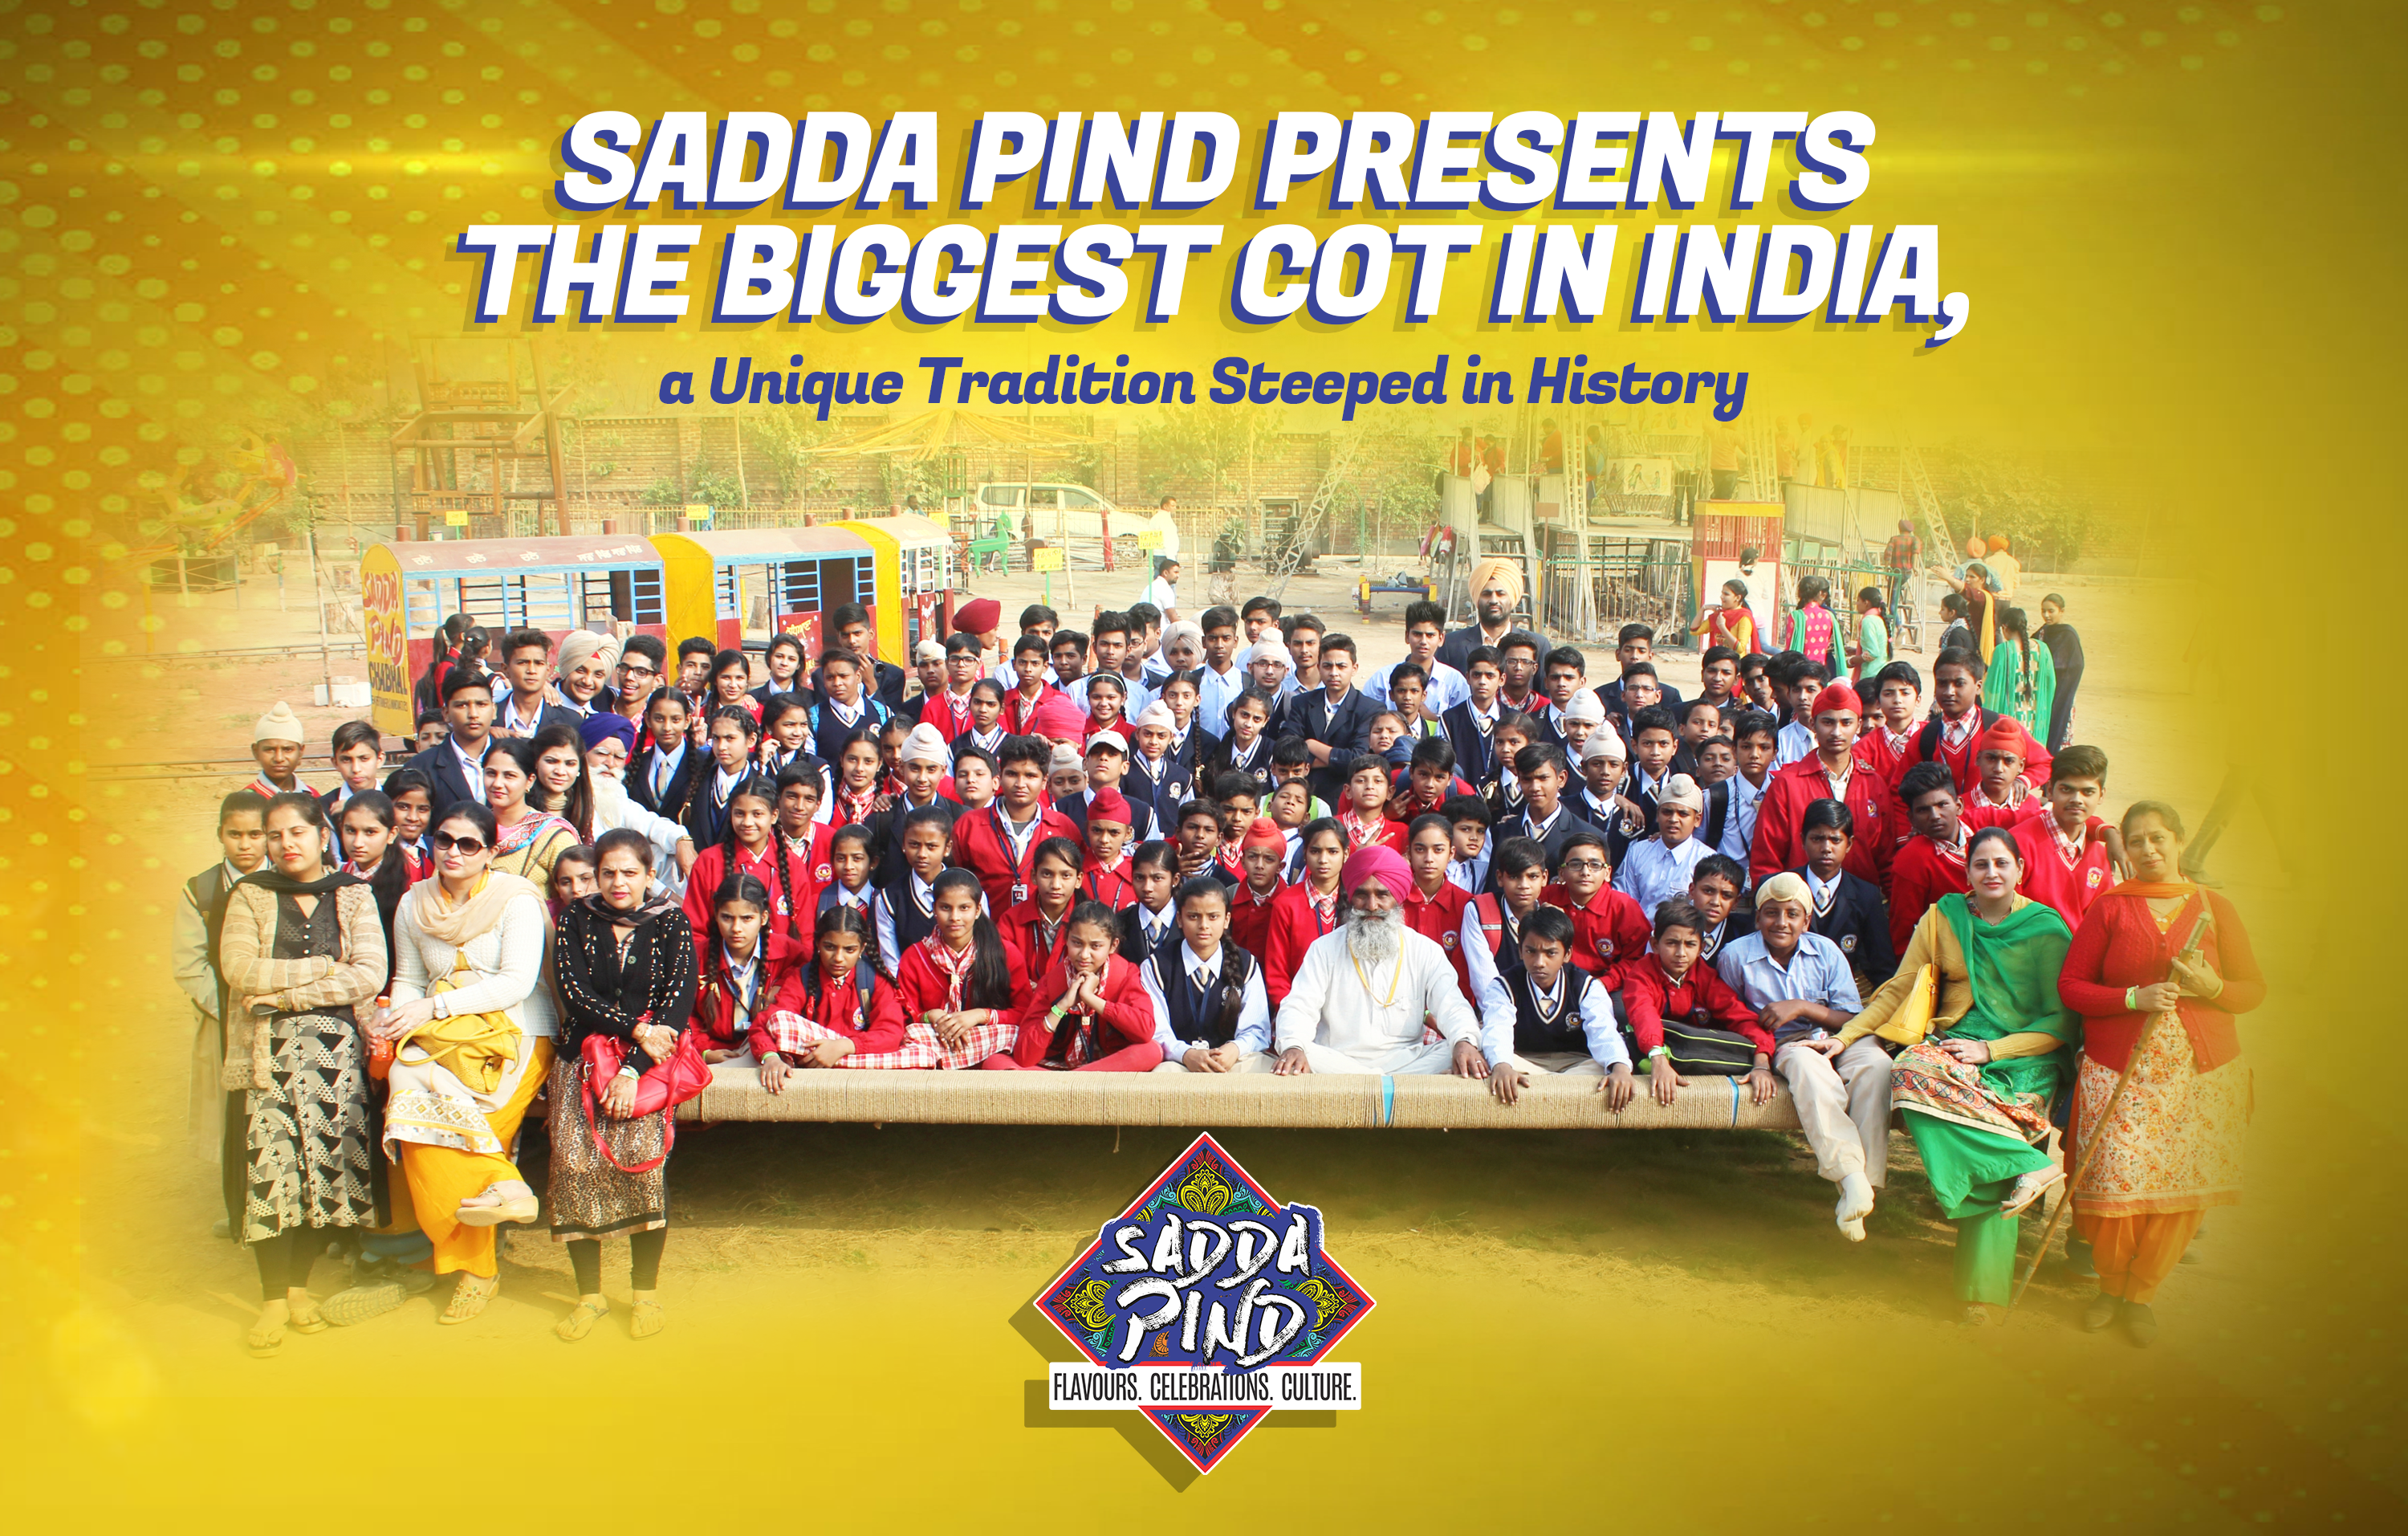 Sadda Pind Presents the Biggest Cot in India, a Unique Tradition Steeped in History